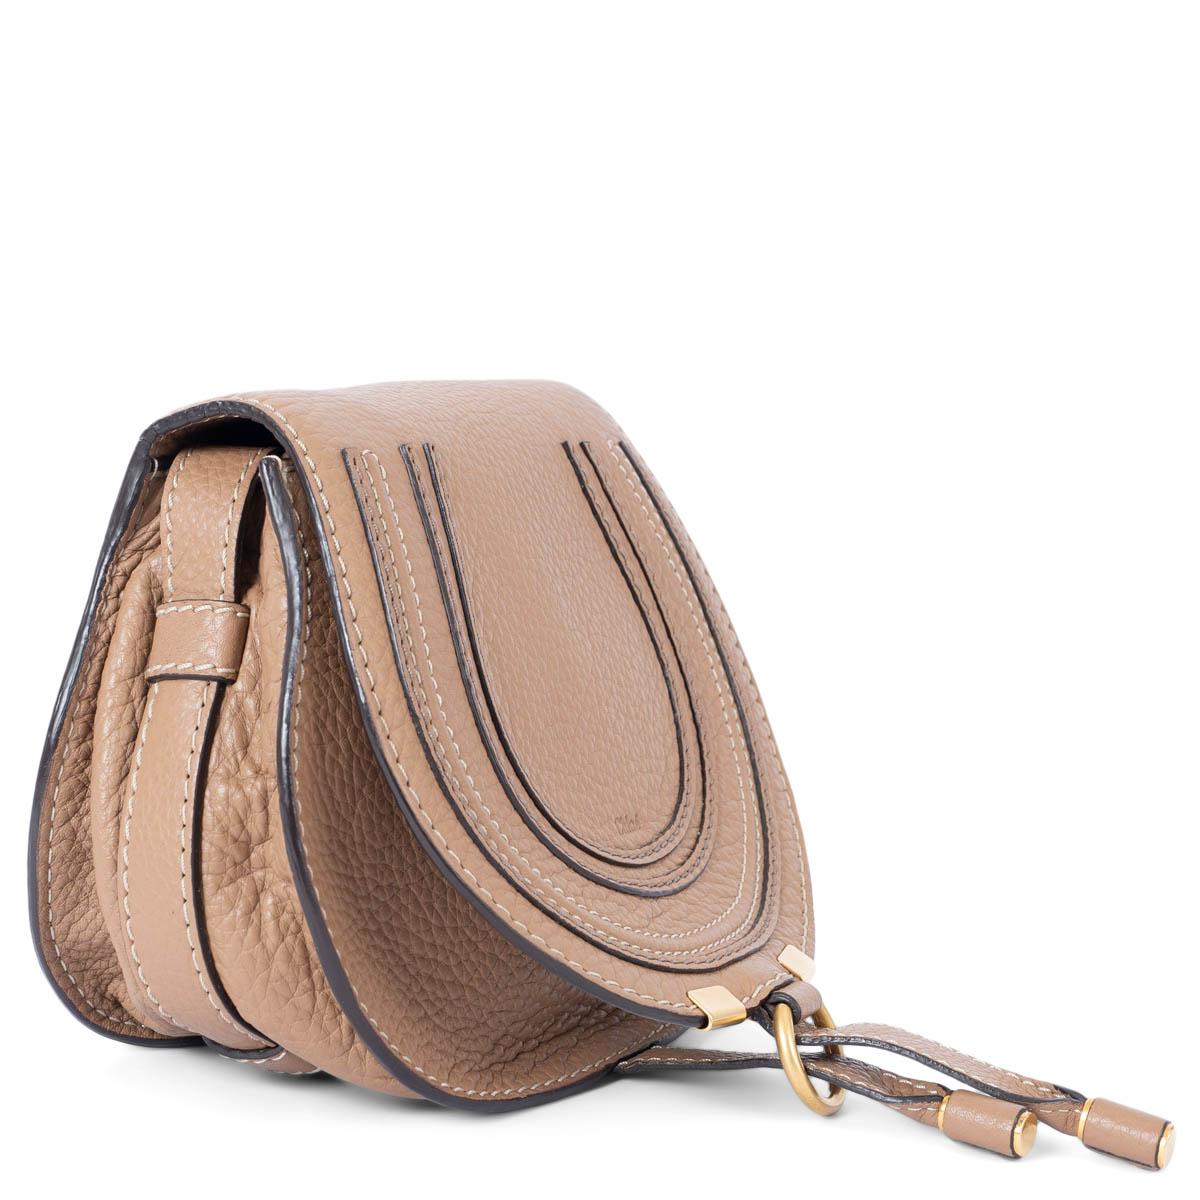 100% authentic Chloé Marcie Mini shoulder bag in brown grained leather. The design features a adjustable shoulder-strap, slot-tab fastening and is lined olive green canvas with an open pocket against the back. Has been carried and is in excellent